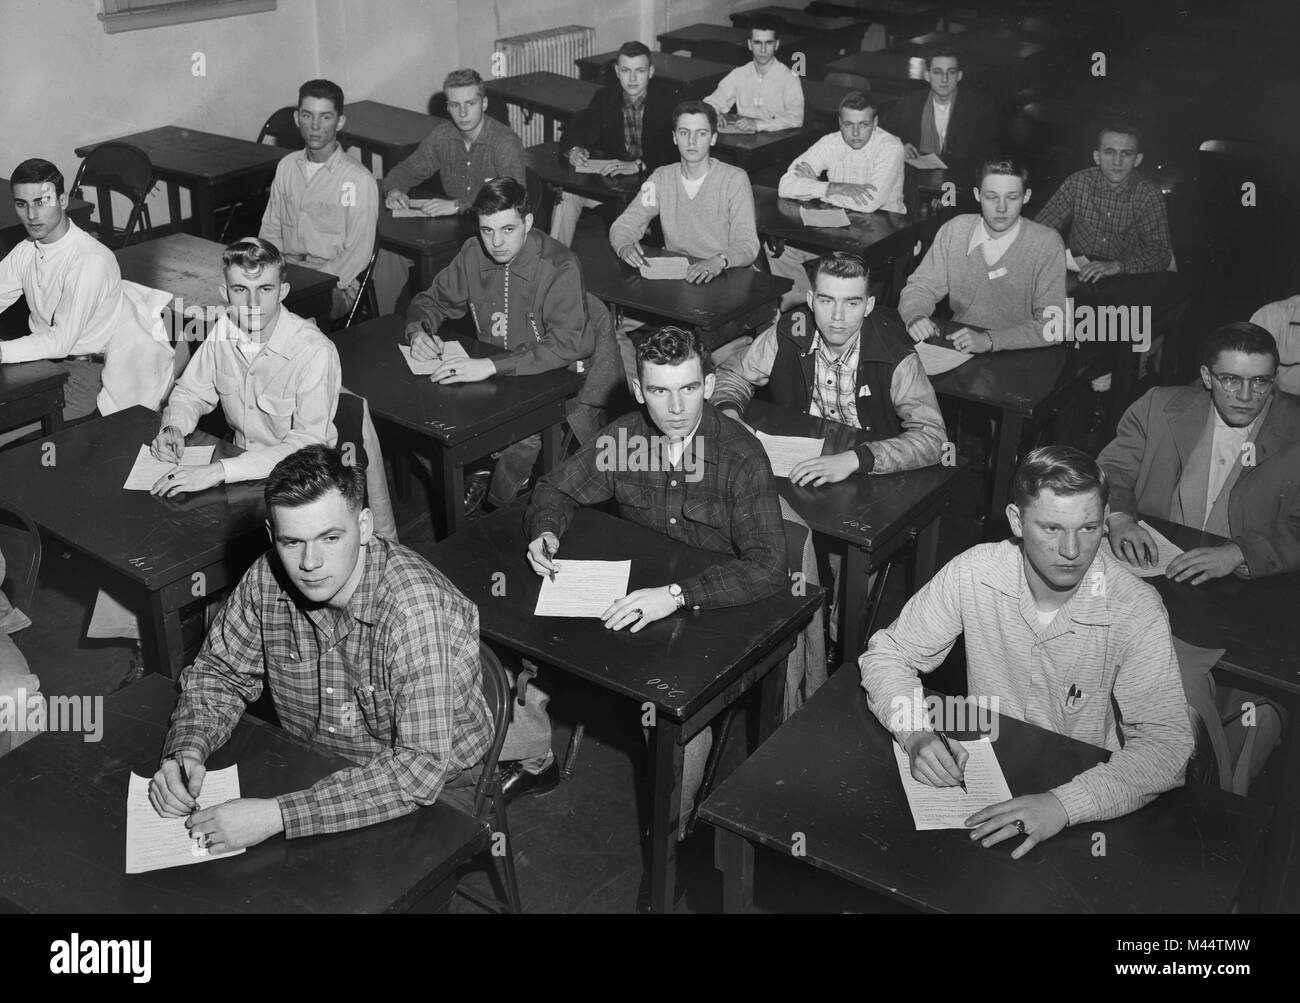 Test taking for high school boys, ca. 1952. Stock Photo